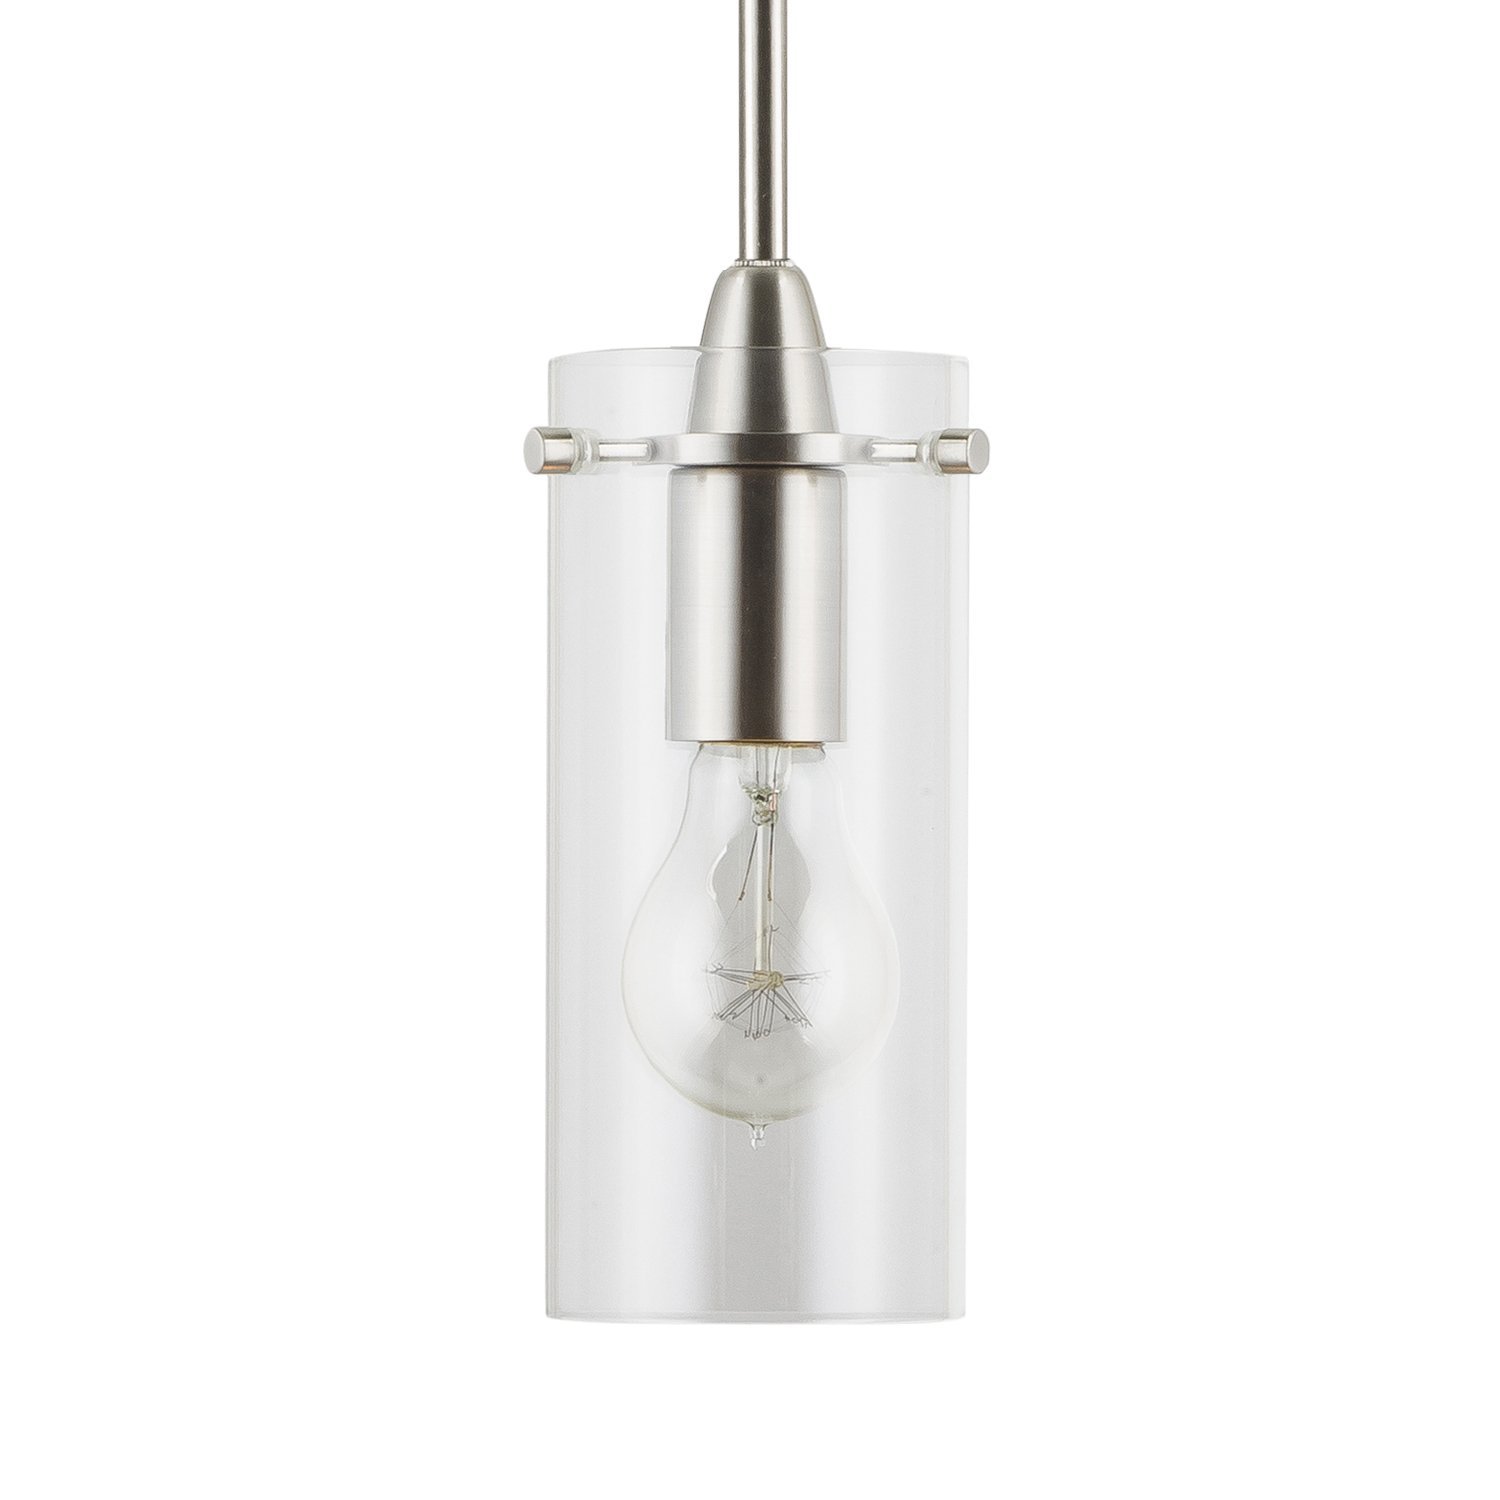 Effimero Small Stem Hung Clear Glass Contemporary Pendant Light. Brushed Nickel Fixture with Adjustable Hanging Height. Industrial Edison Modern Style. UL Listed, Linea di Liara LL-P311-BN